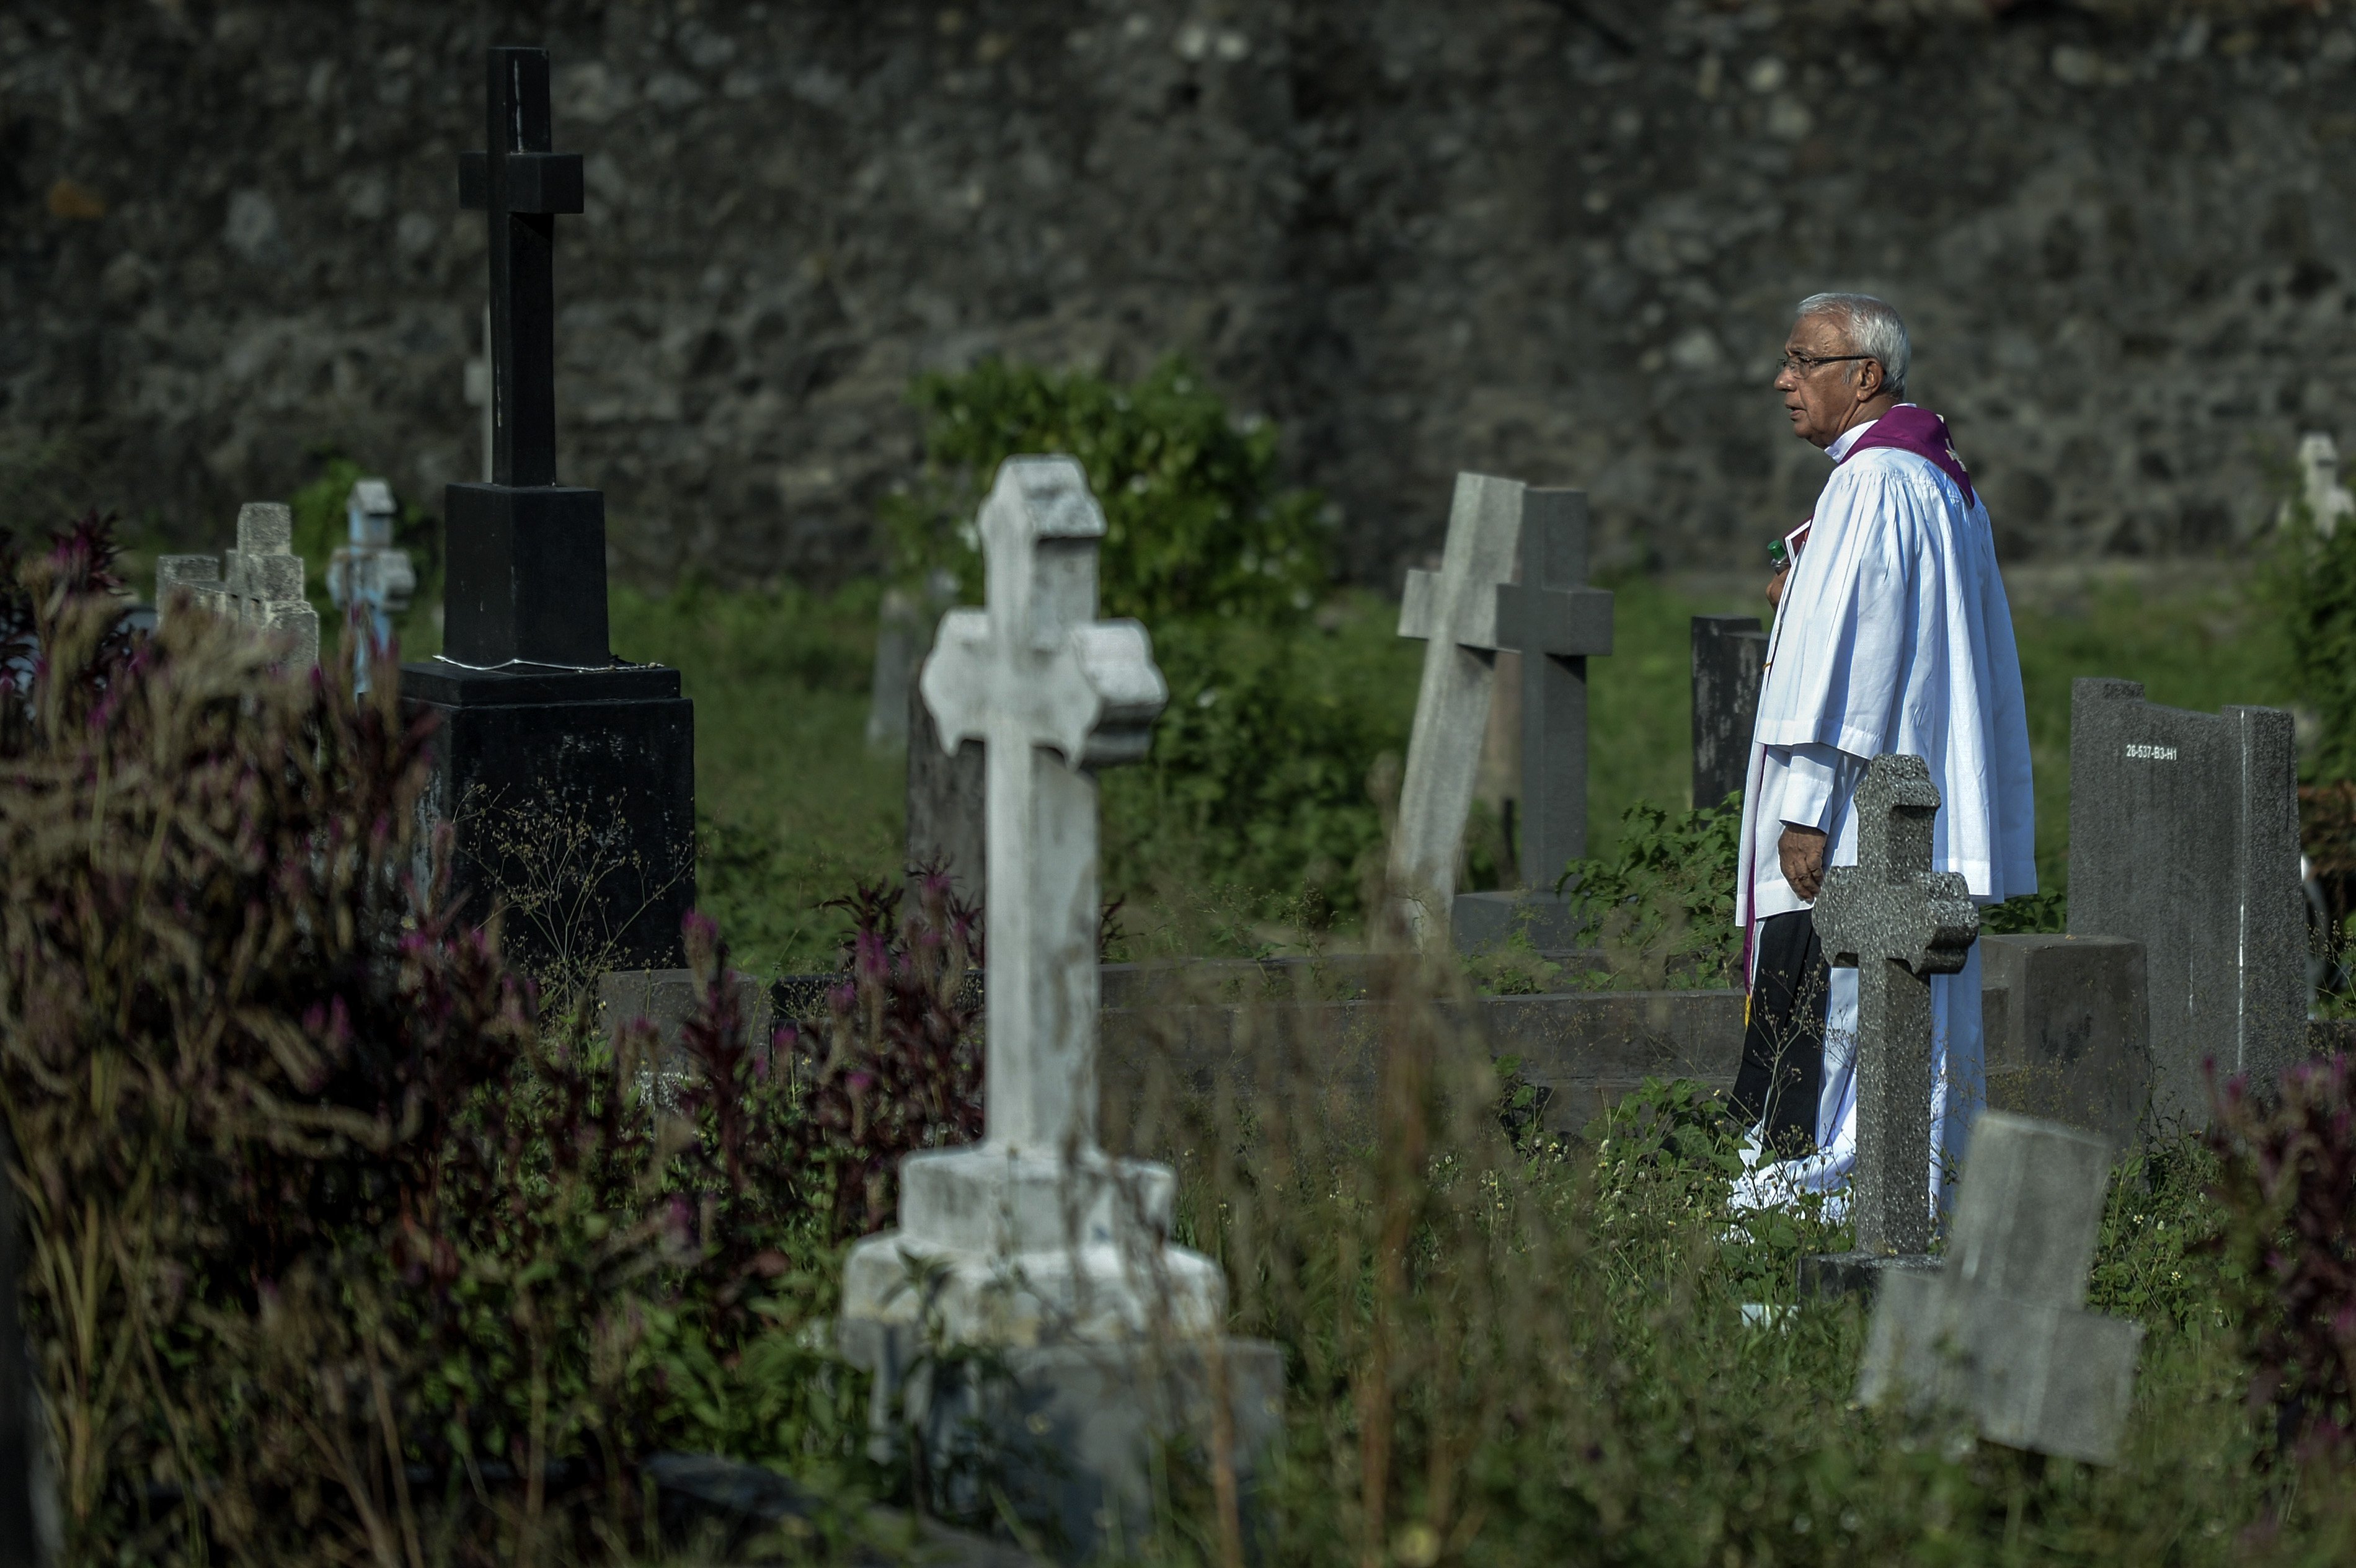  A priest waiting among the graves for the beginning of the burial of a victim of the Easter Sunday Bombings in Colombo, Sri Lanka | Photo: Getty Images